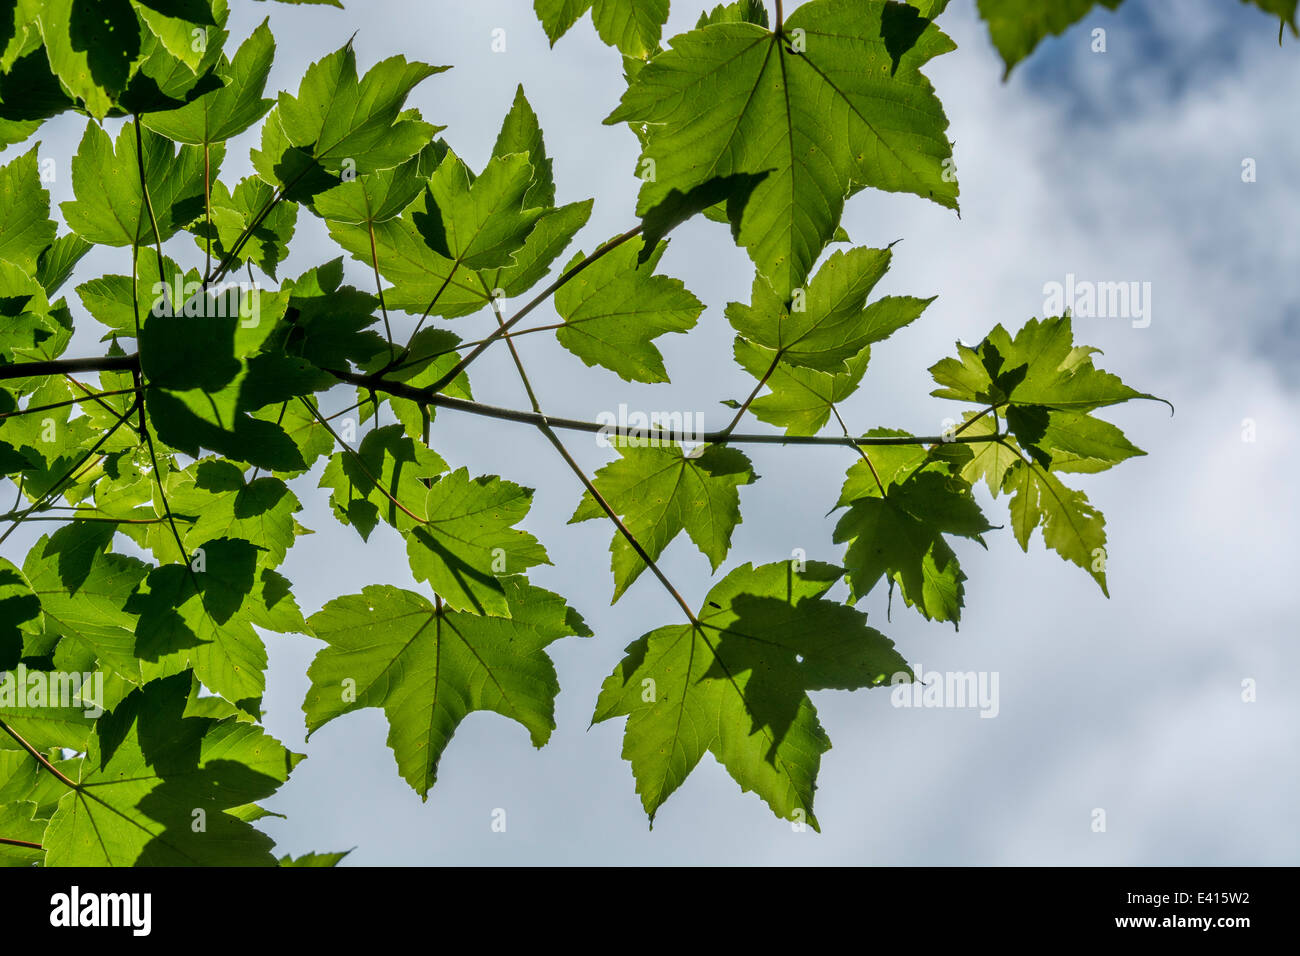 Leaves of Sycamore / Acer pseudoplatanus set against sky. Sycamore is a member of the Maple family. Sunlight through leaves, leaves overhead. Stock Photo